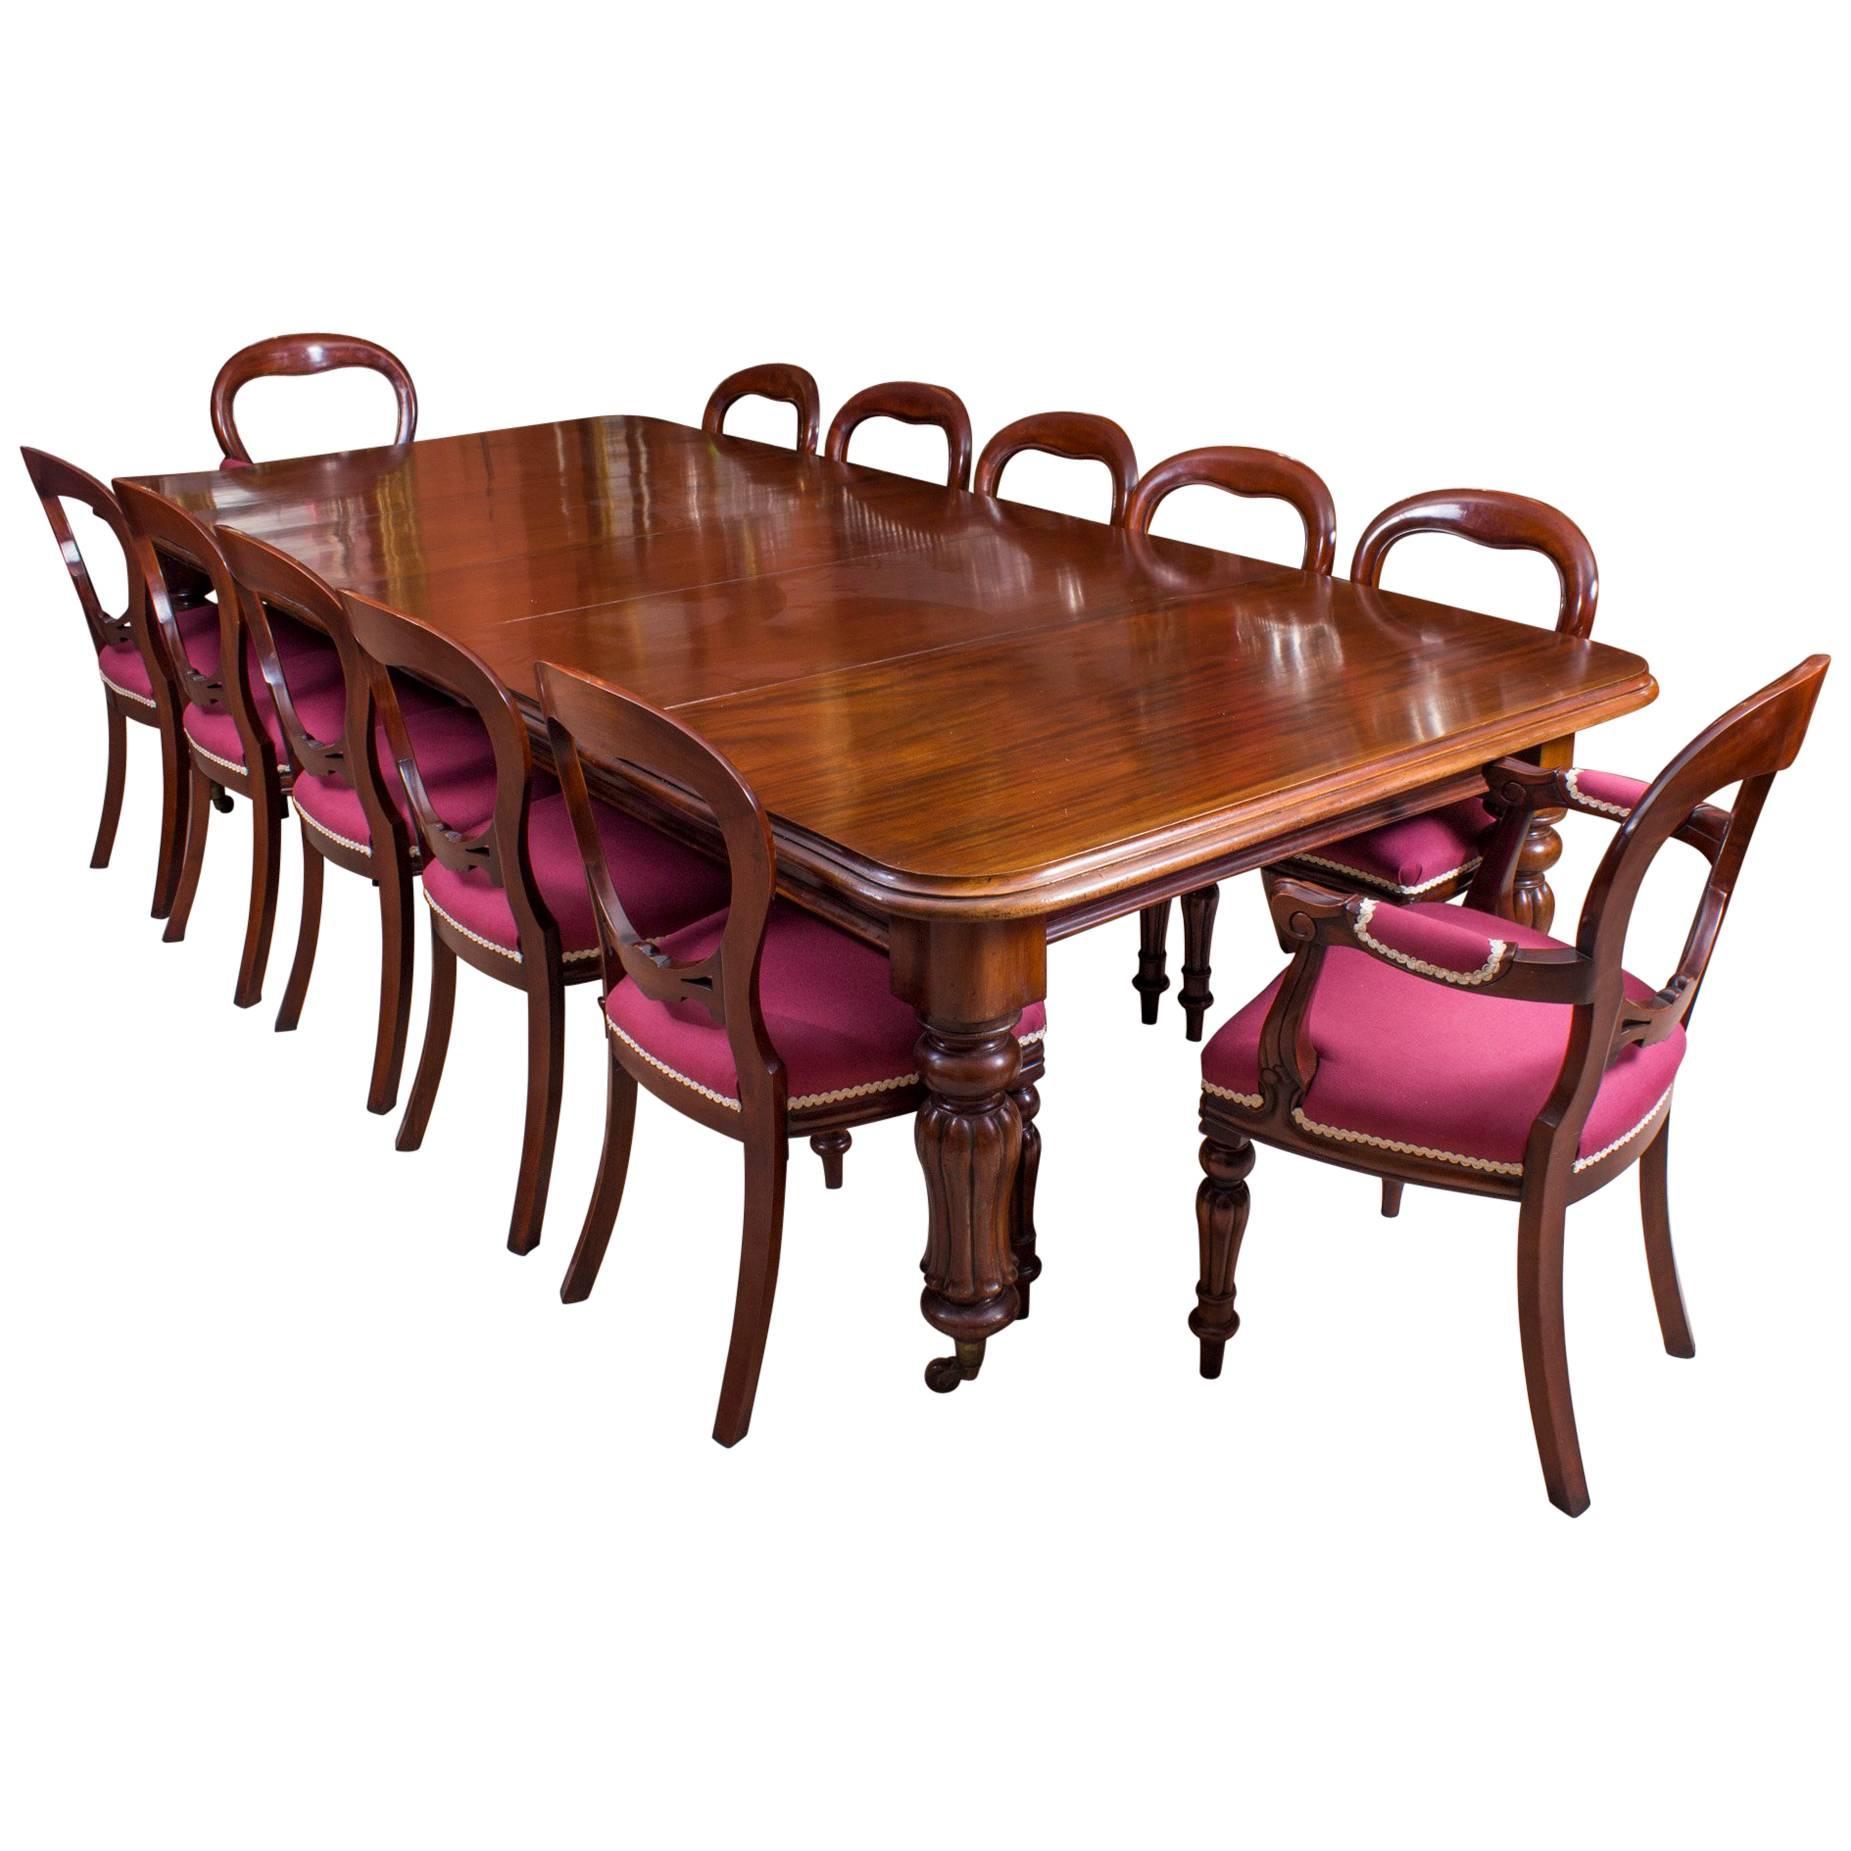 19th Century William IV Mahogany Dining Table and 12 Chairs